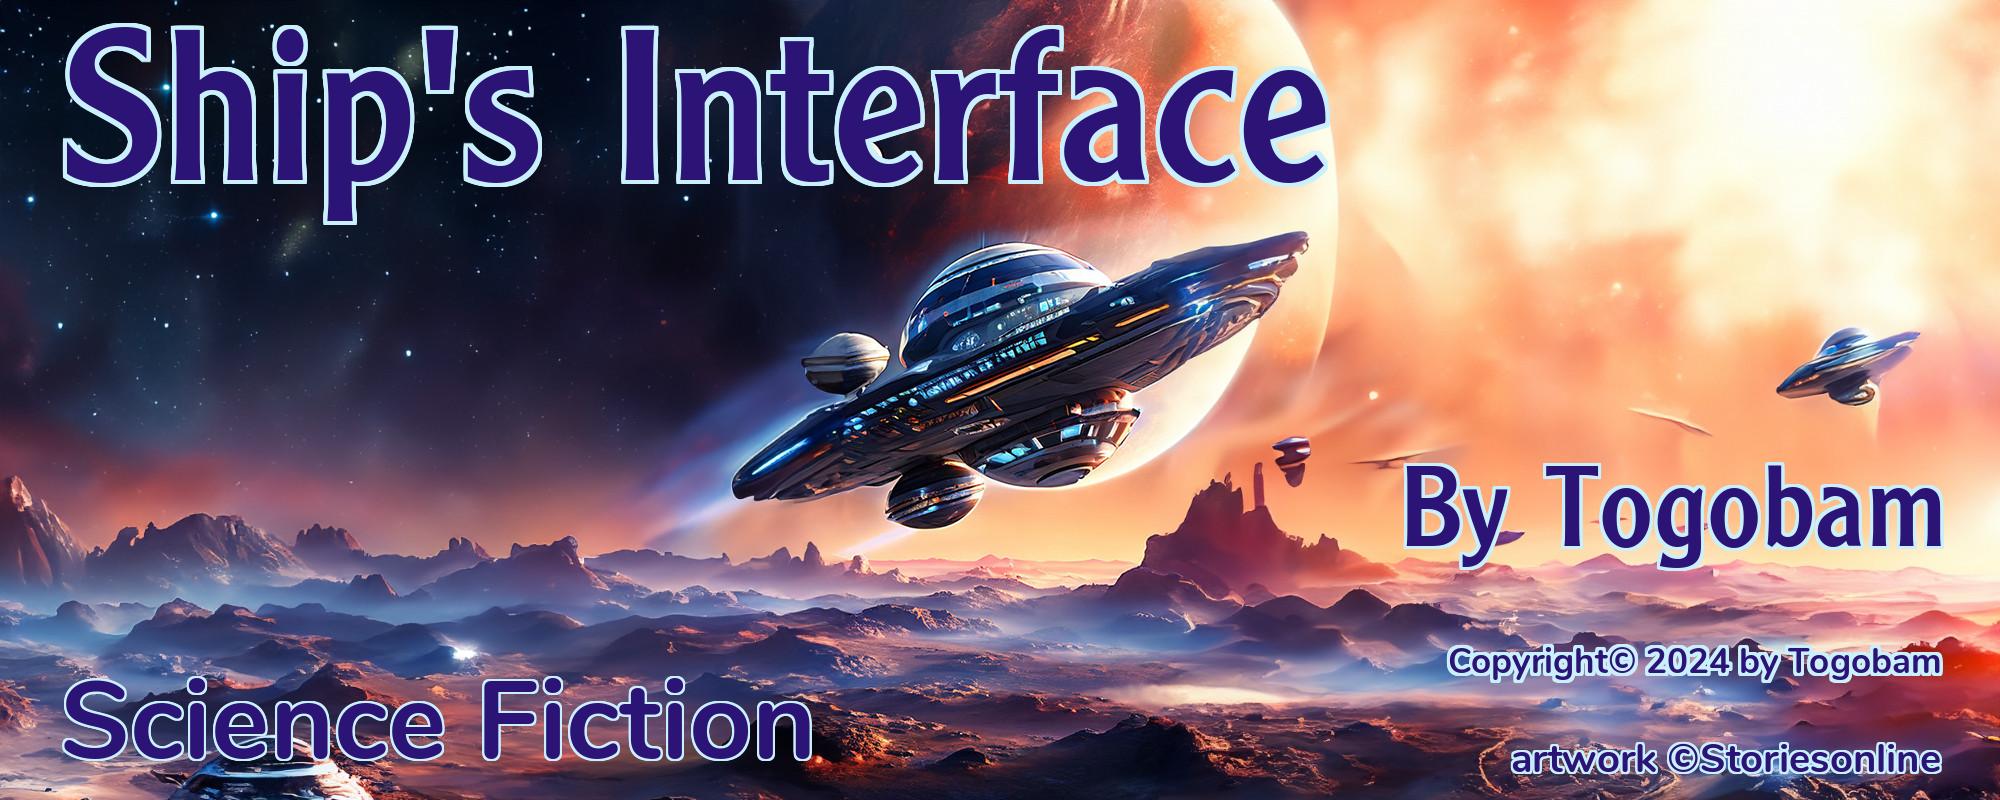 Ship's Interface - Cover